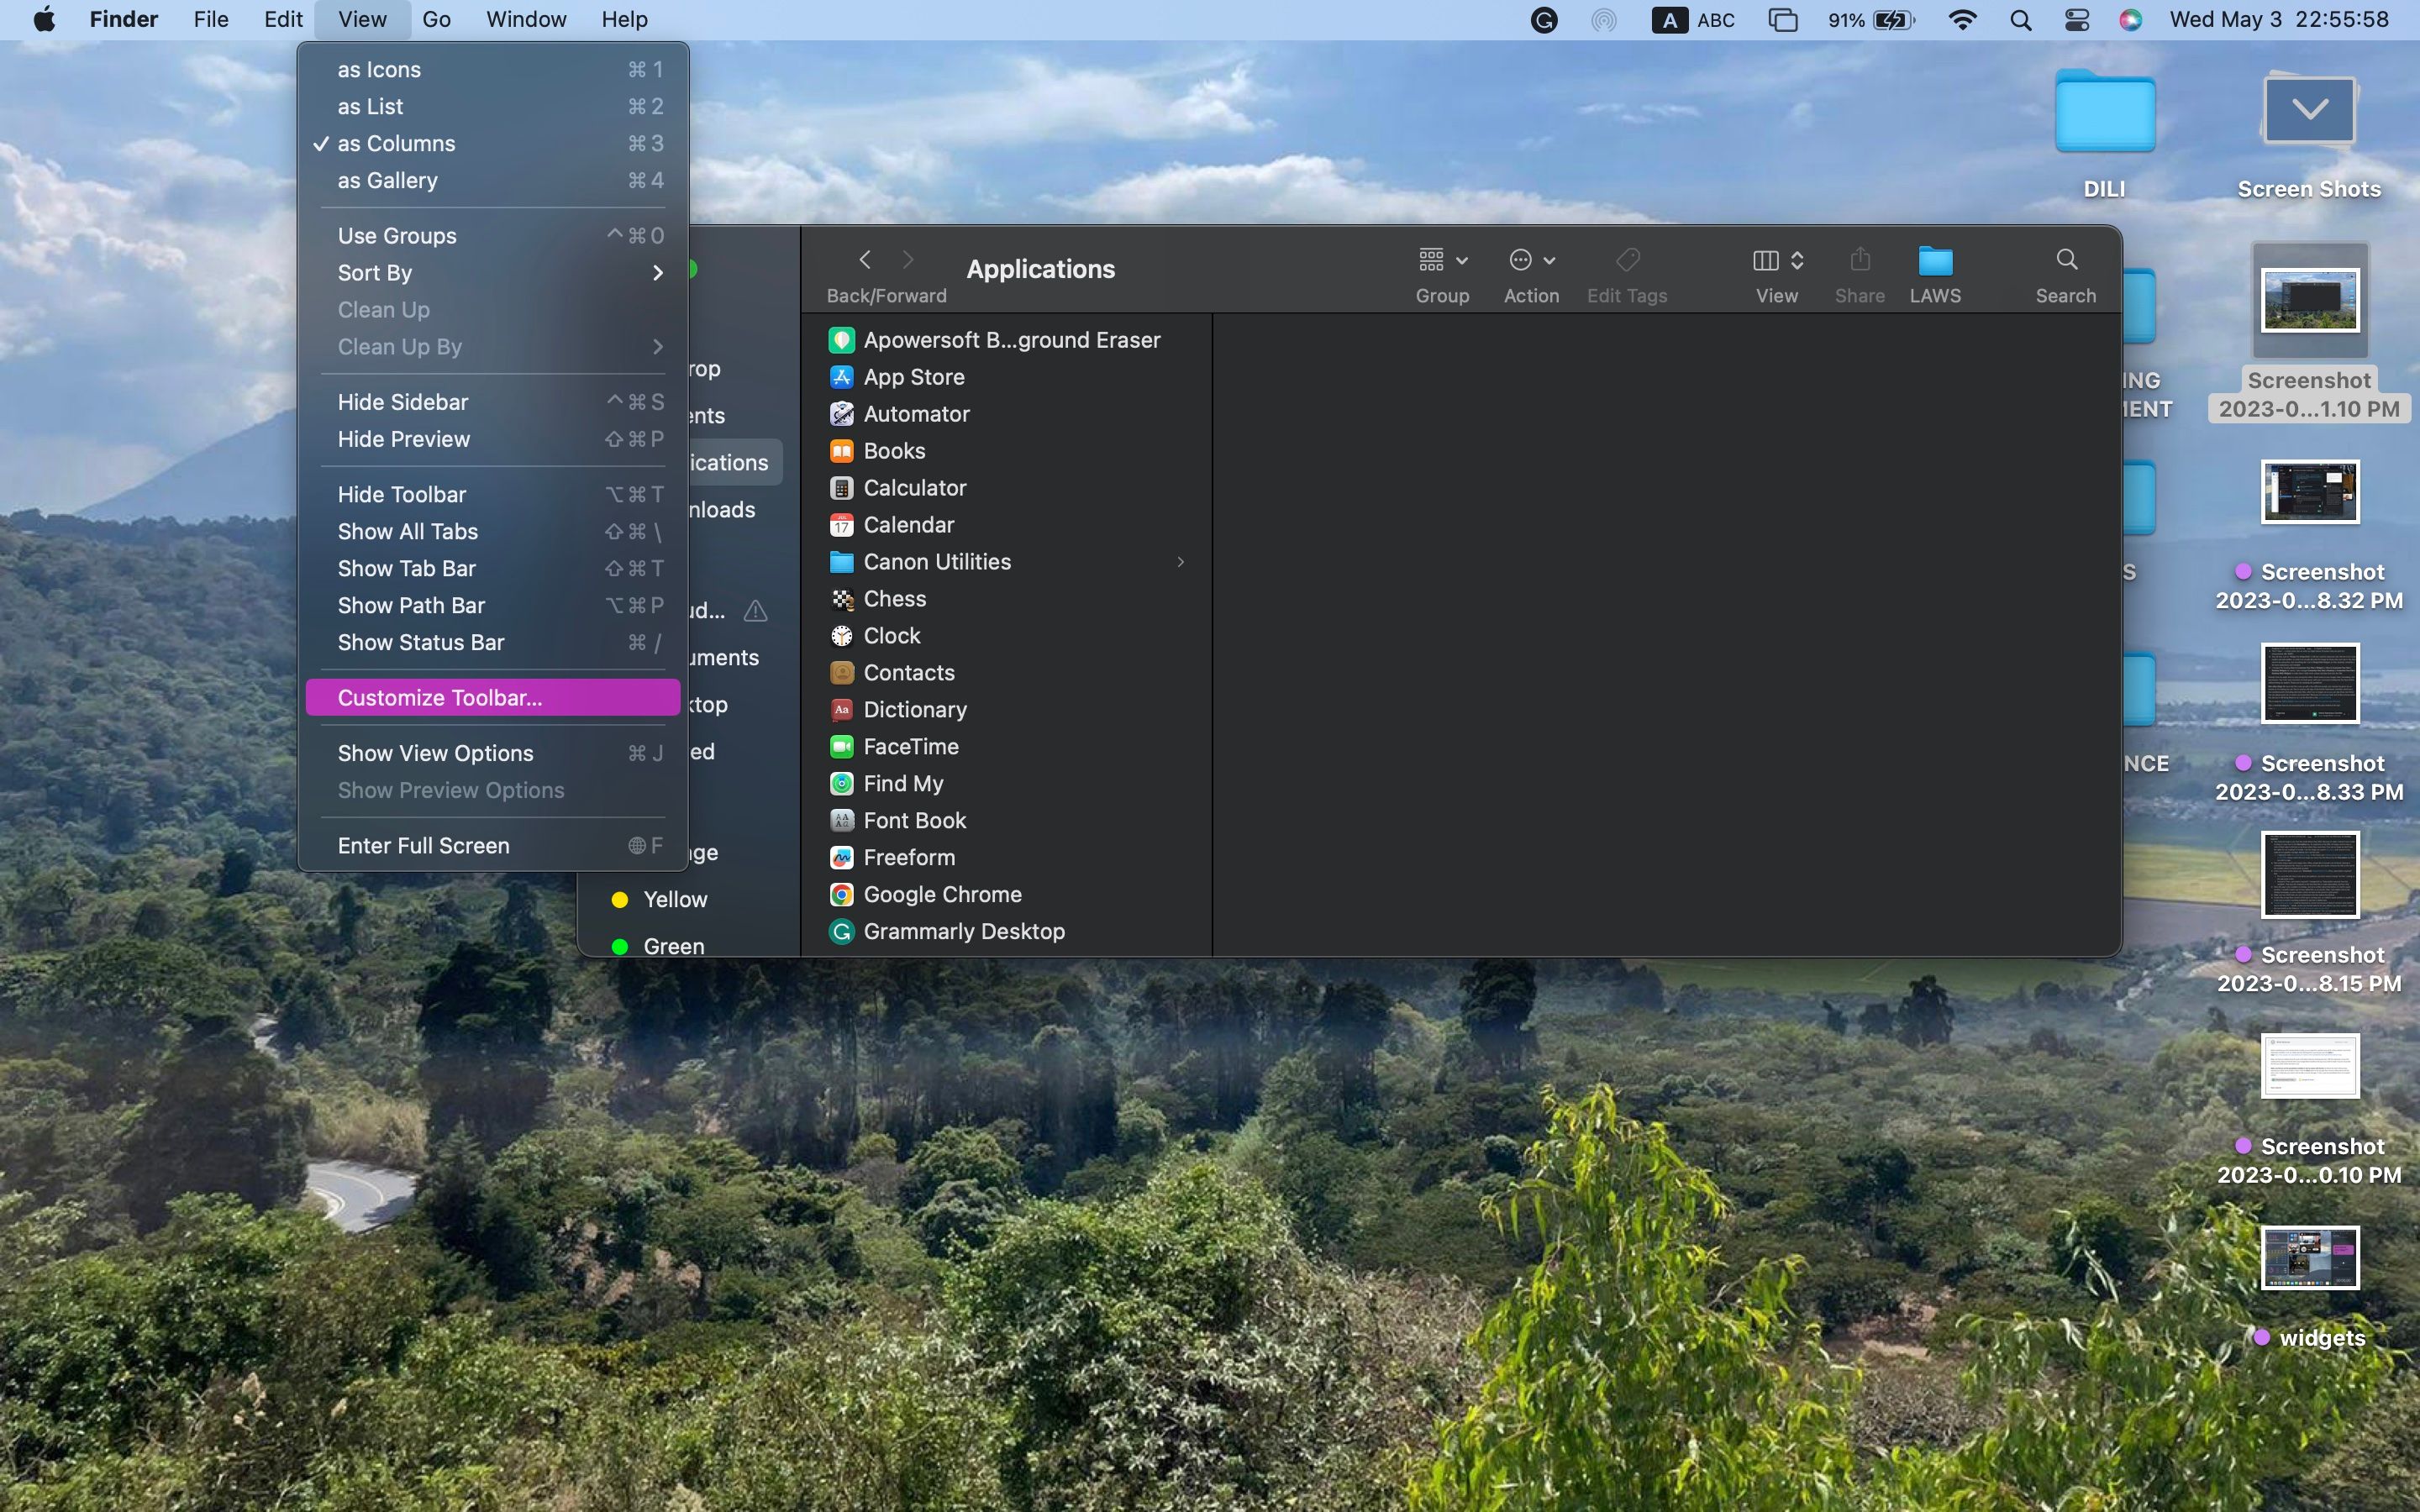 Customization menu for the Finder toolbar in macOS